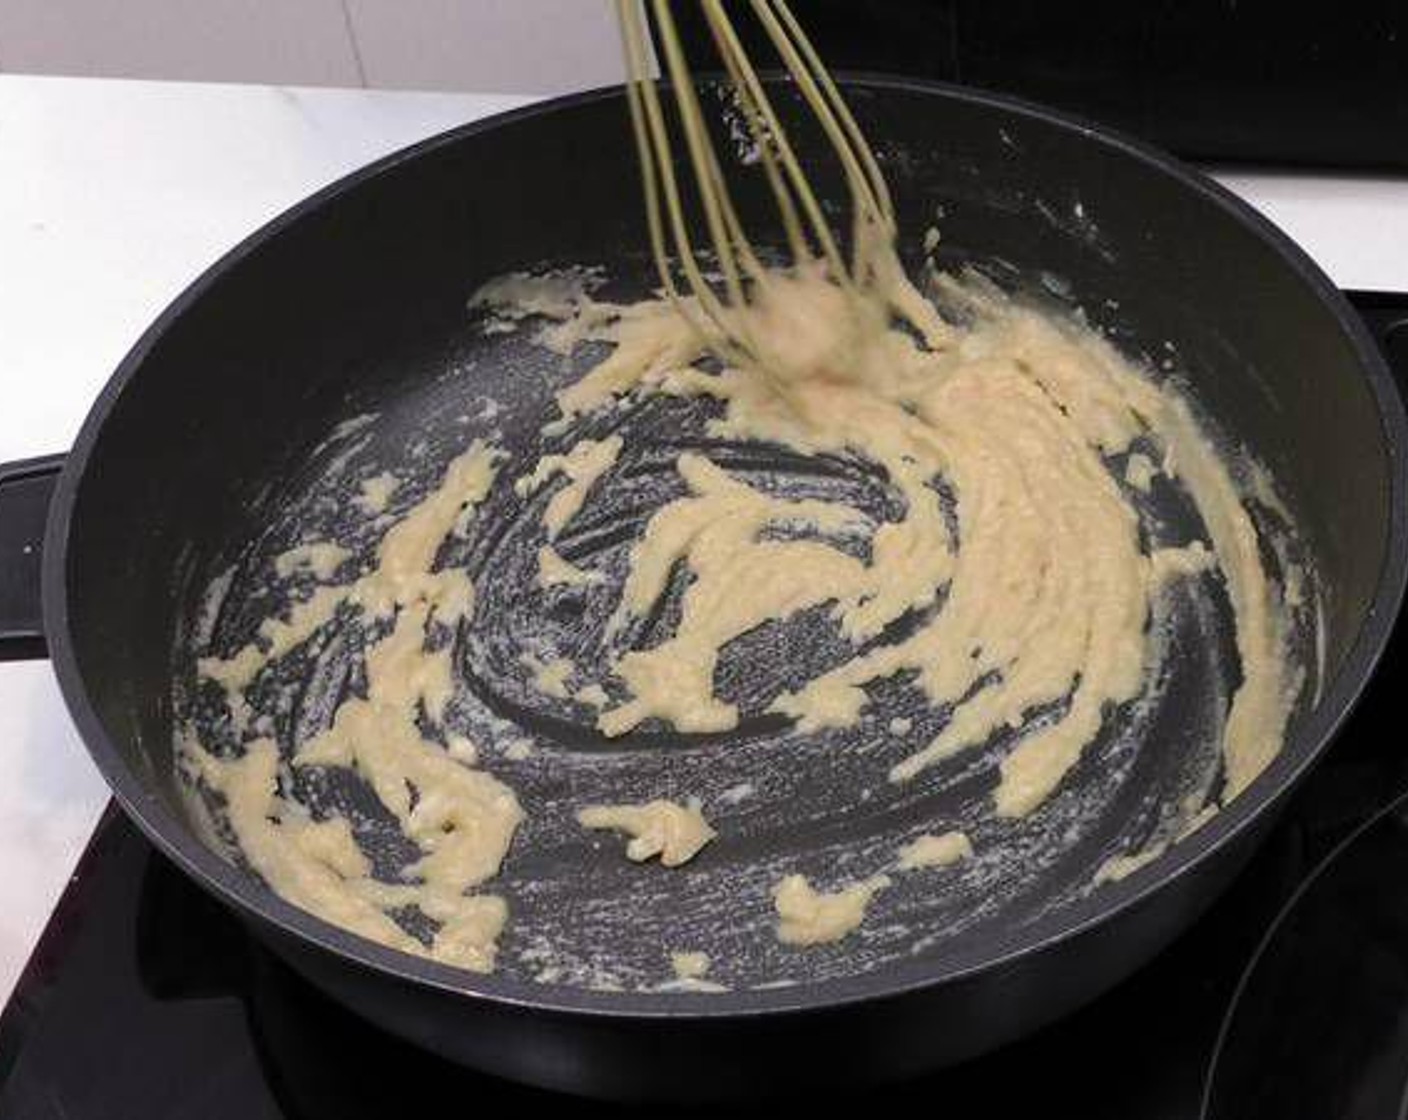 step 1 We start by making the béchamel sauce. In a pan on medium heat add the Butter (1/4 cup). Once melted add the All-Purpose Flour (1/2 cup) and mix thoroughly with butter.